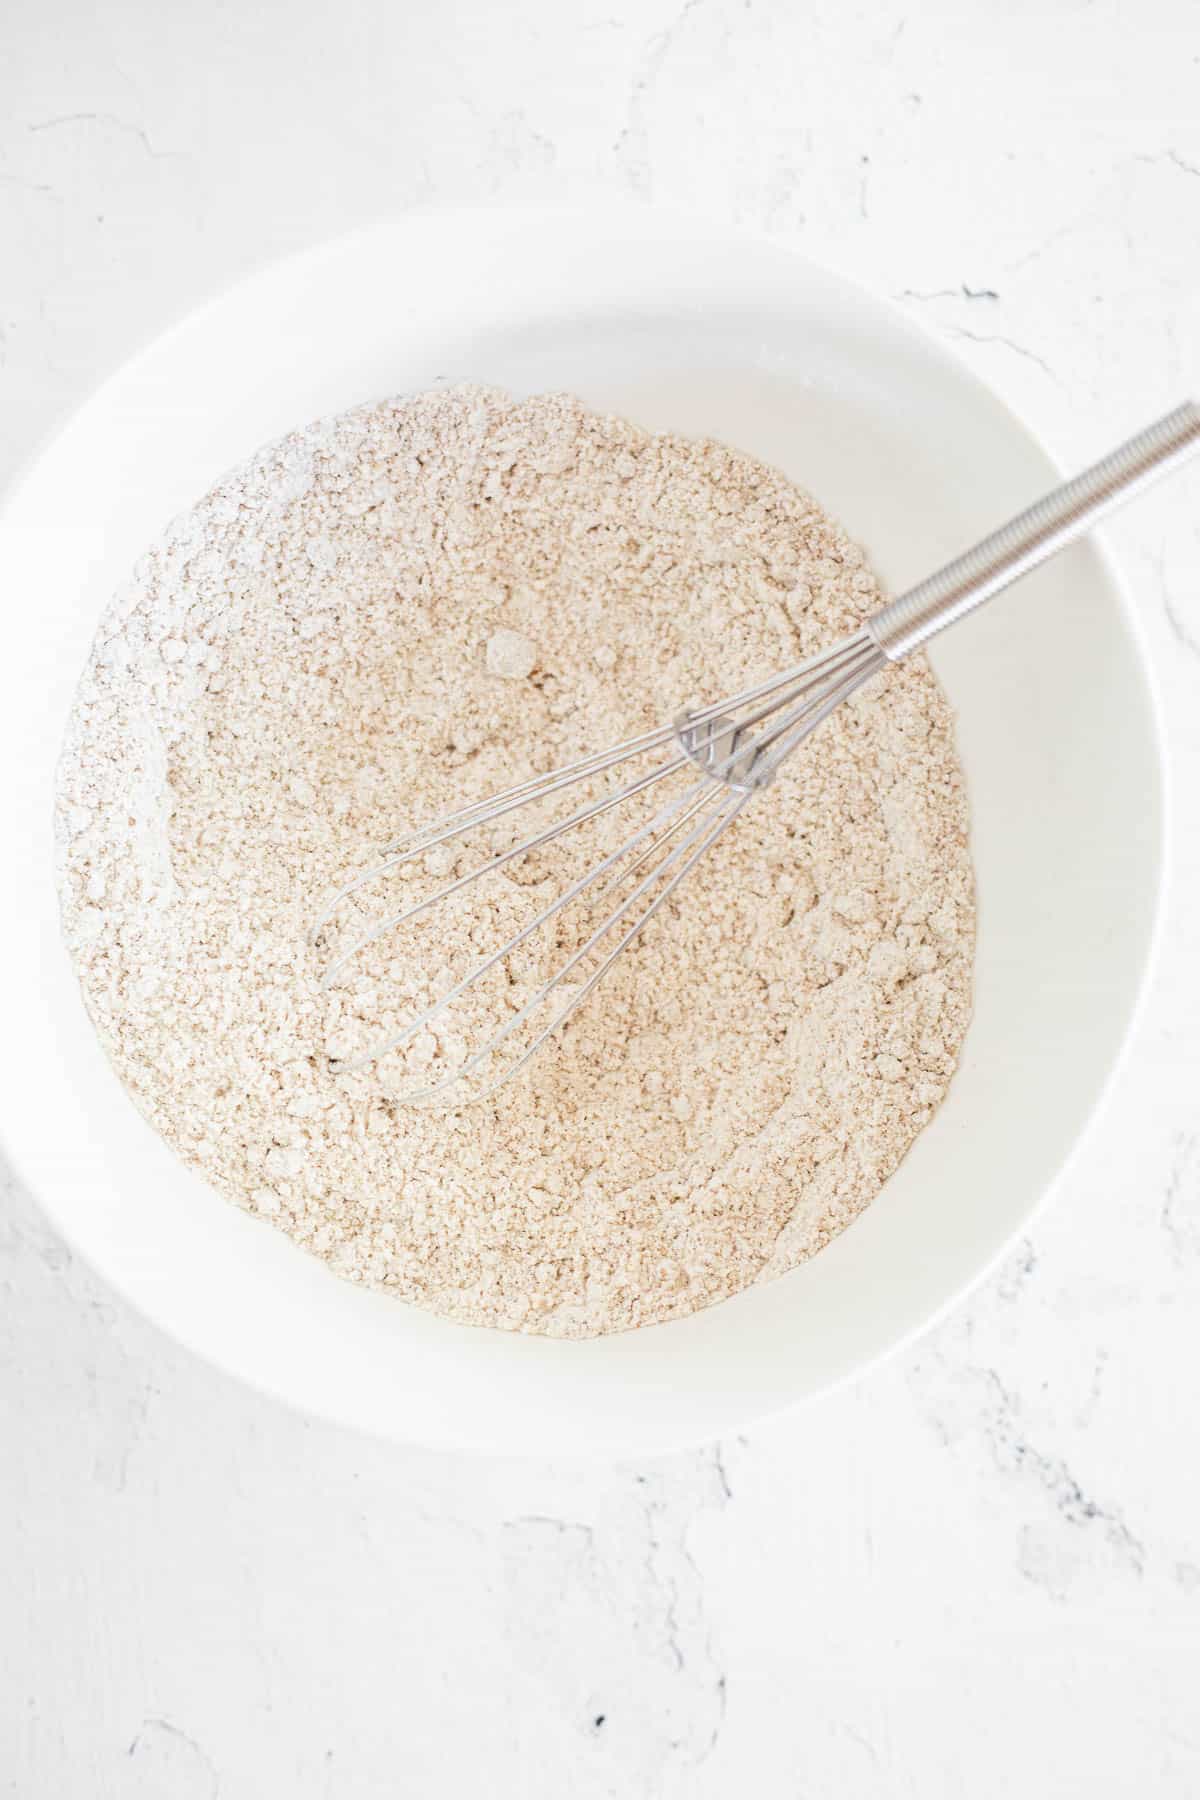 gluten free flour, baking soda, and salt whisked together in a white bowl.